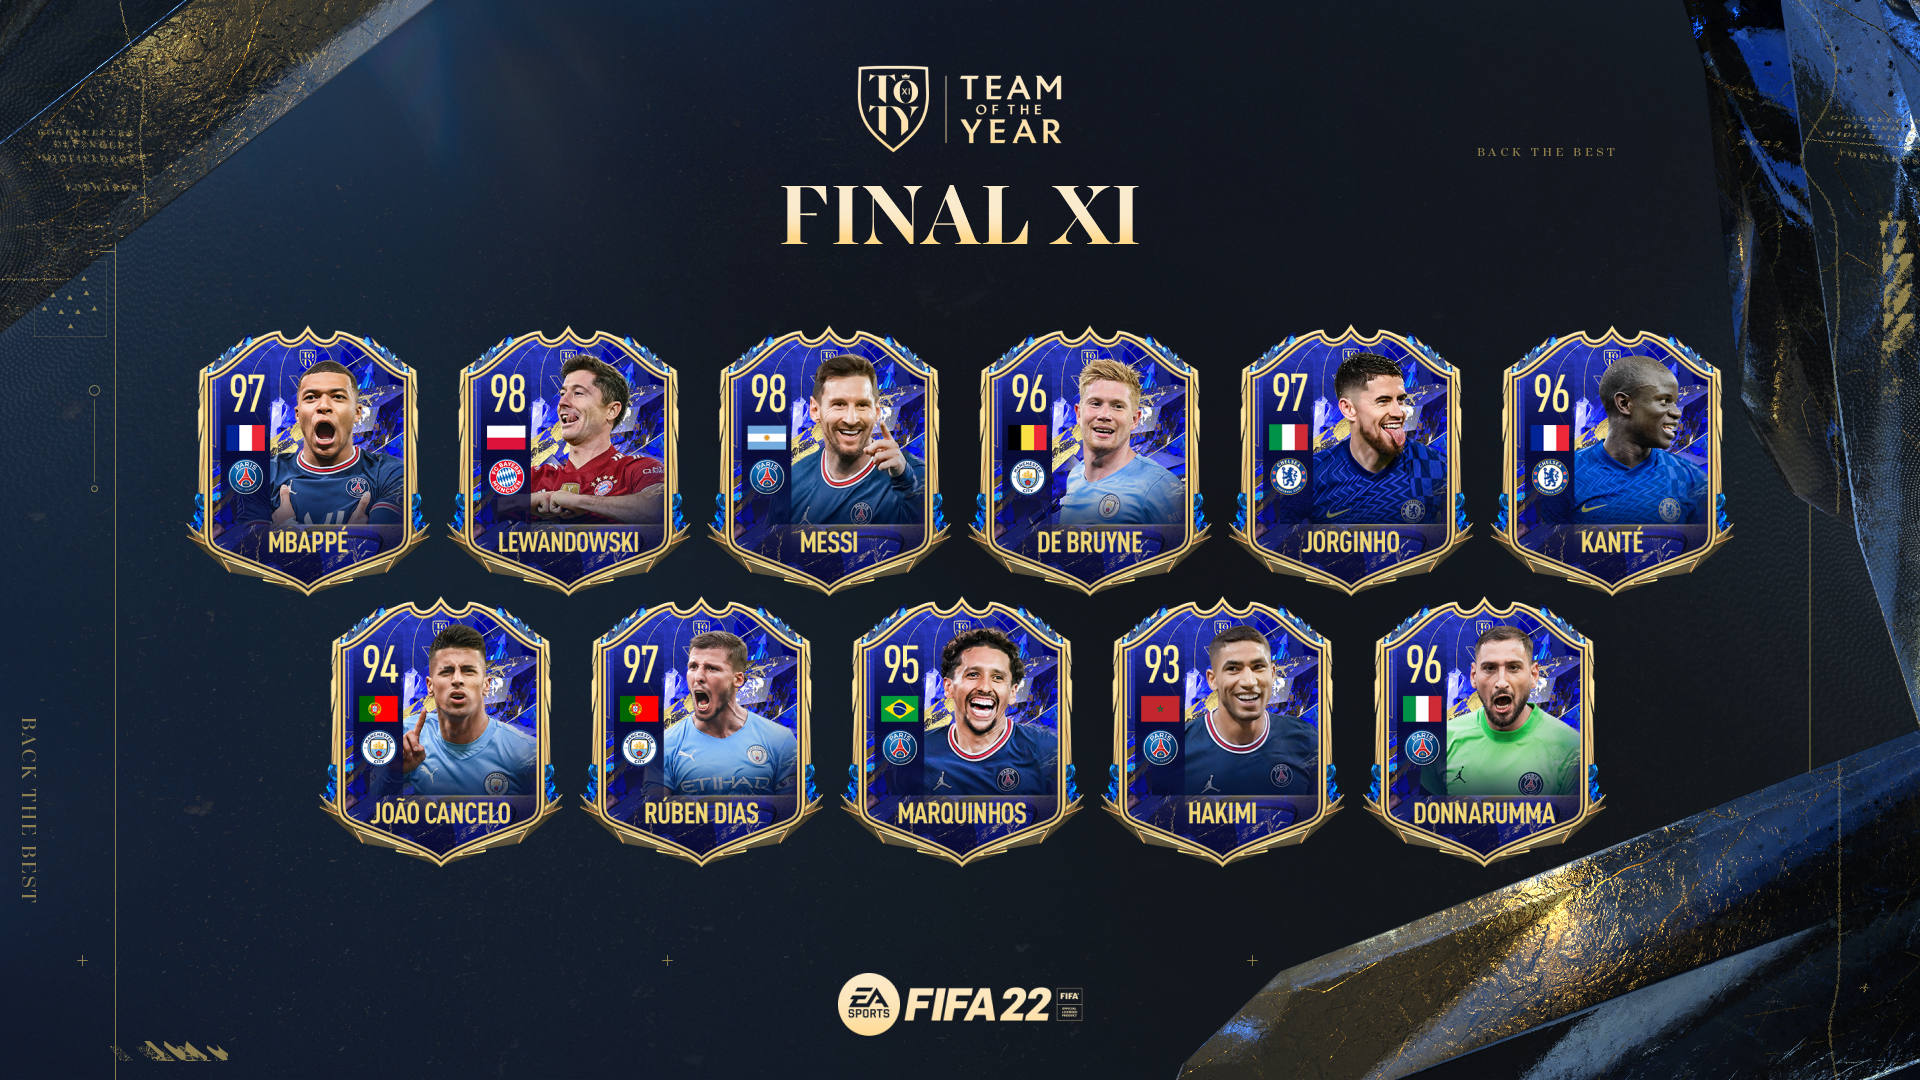 EA SPORTS Announces FIFA 22 Team Of The Year as Voted on by Fans | Business  Wire